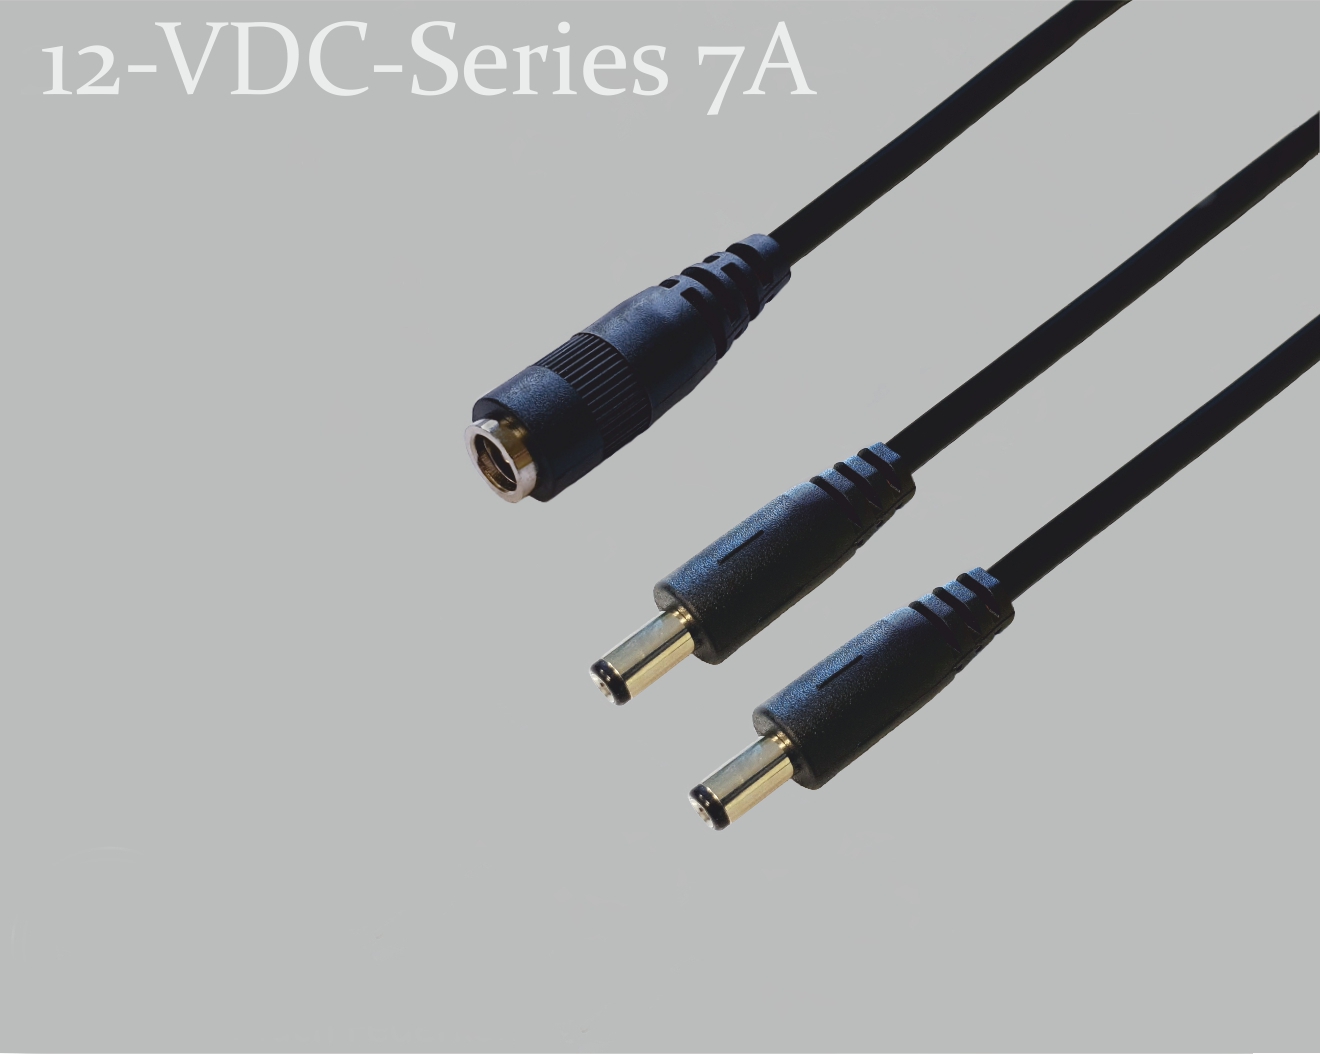 12-VDC-Series 7A, DC distributor 1x DC coupling to 2x DC plug with spring contact, 2.5x5.5mm, round cable 2x0.5mm², black, 0.3m